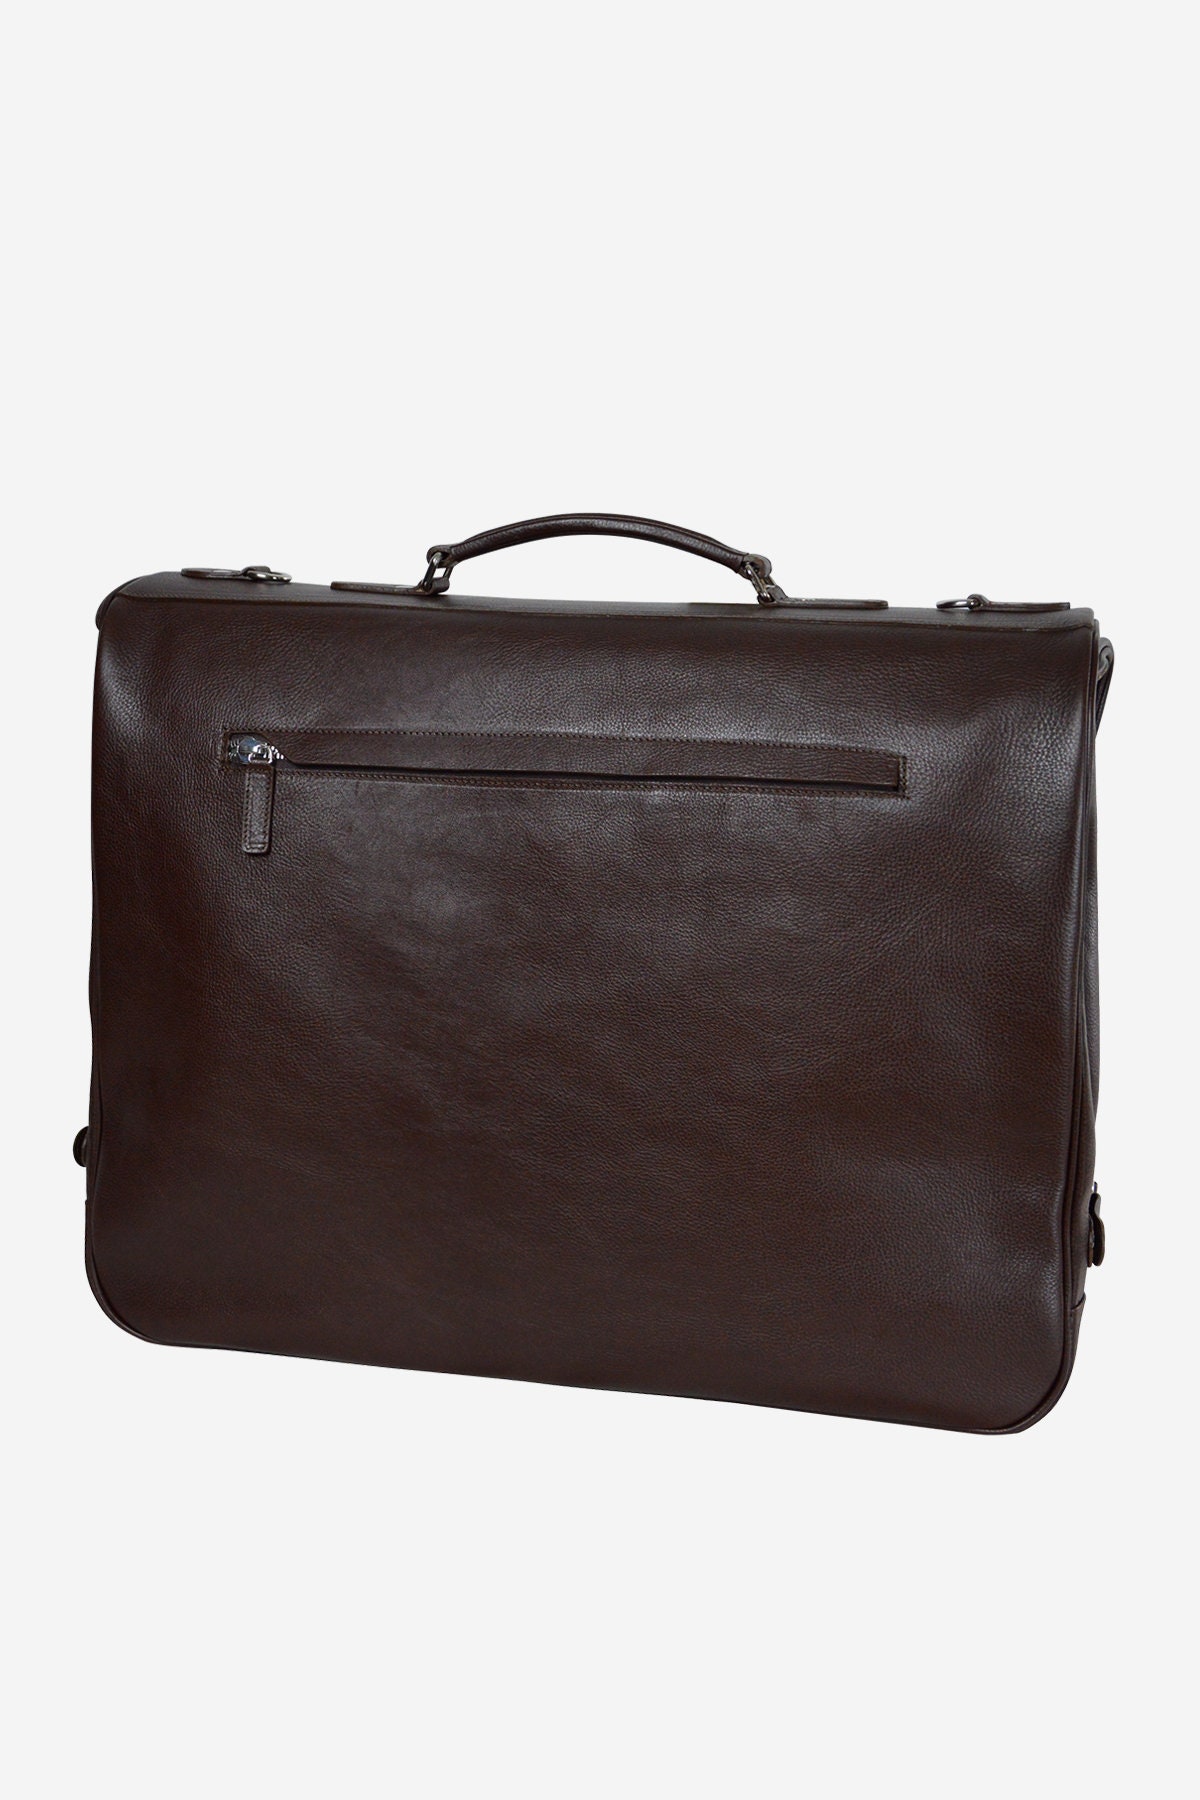  Royal Garment Leather Bag, Handmade to Order in Italy